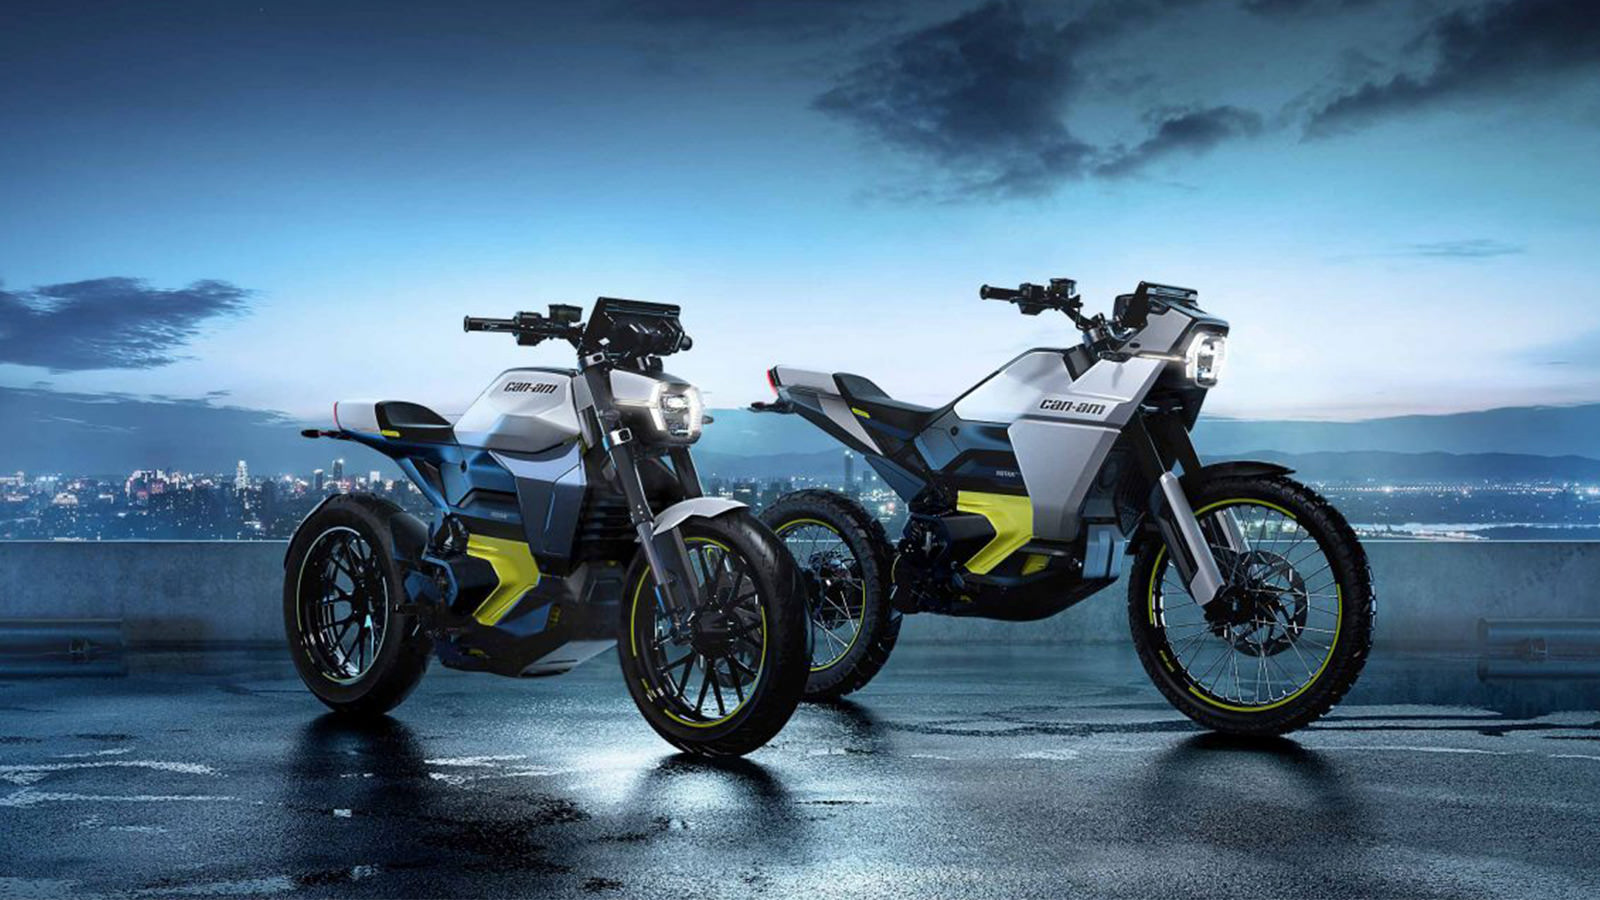 Can-Am Electric Motorcycles